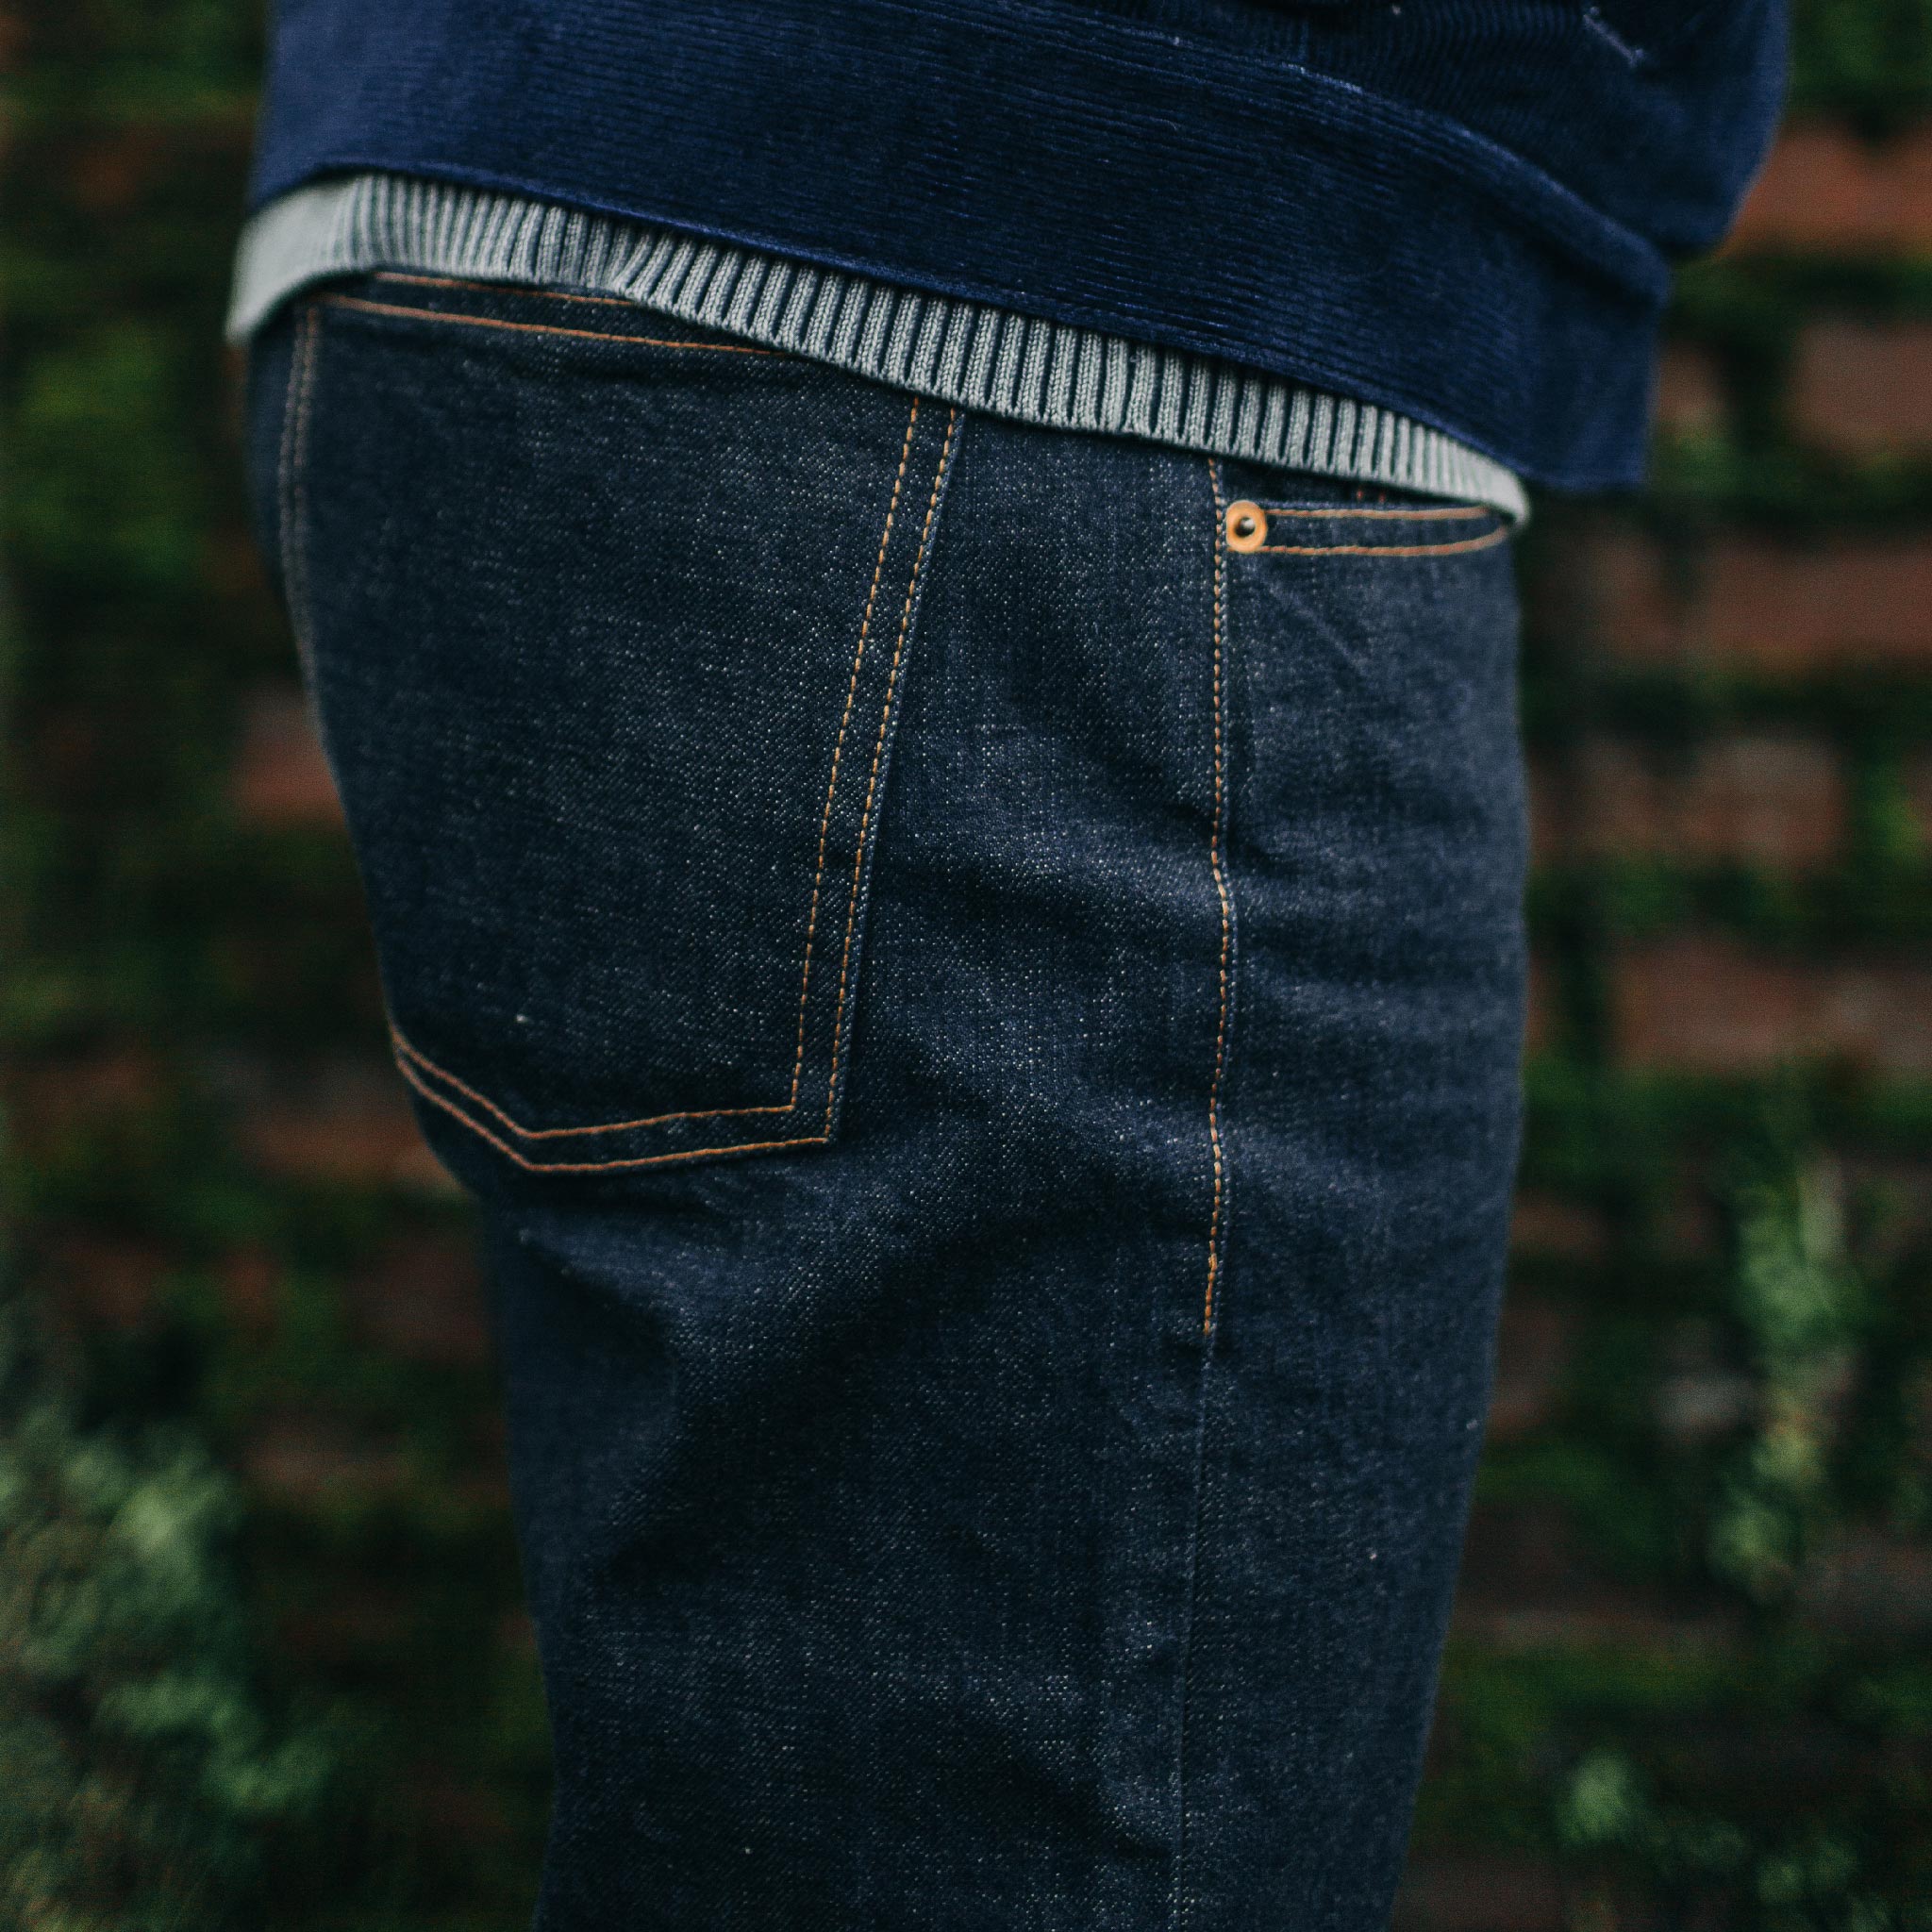 The Democratic Jean in Rinsed Organic Selvage | Taylor Stitch